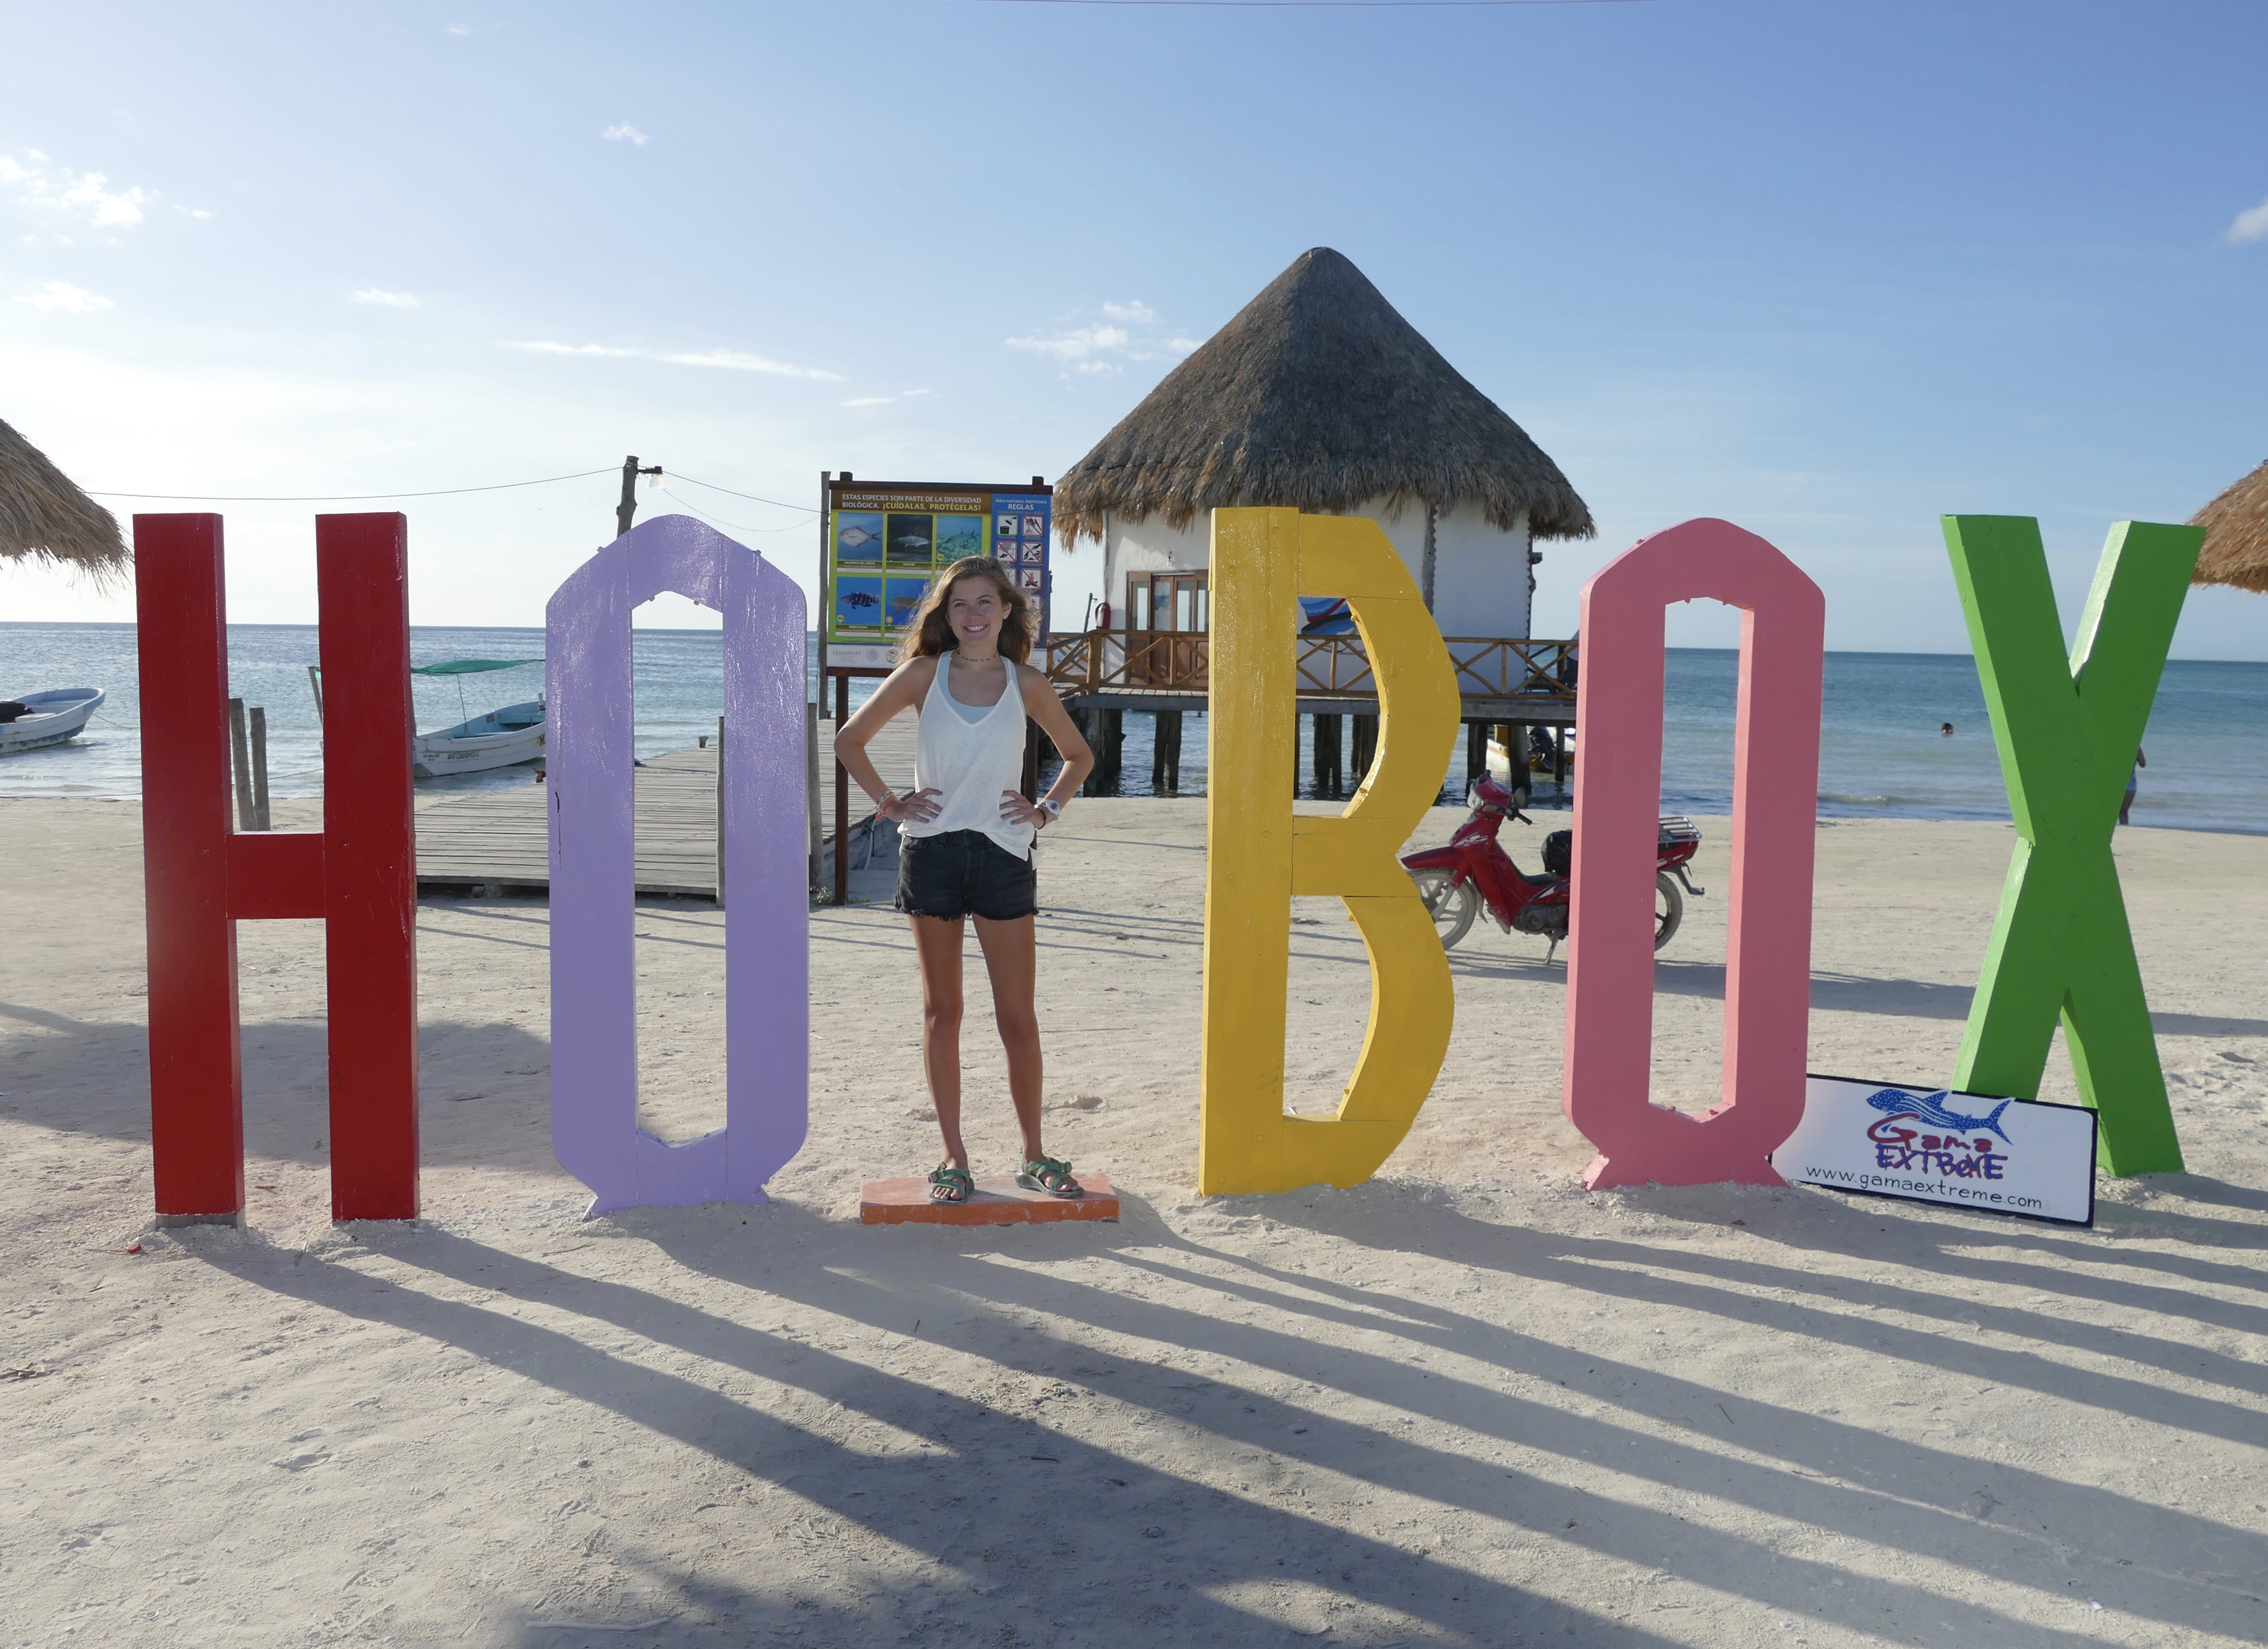 Life sized Holbox Island sign on the beach. The space for the "L" is blank so visitors can stand in its place for photo ops.